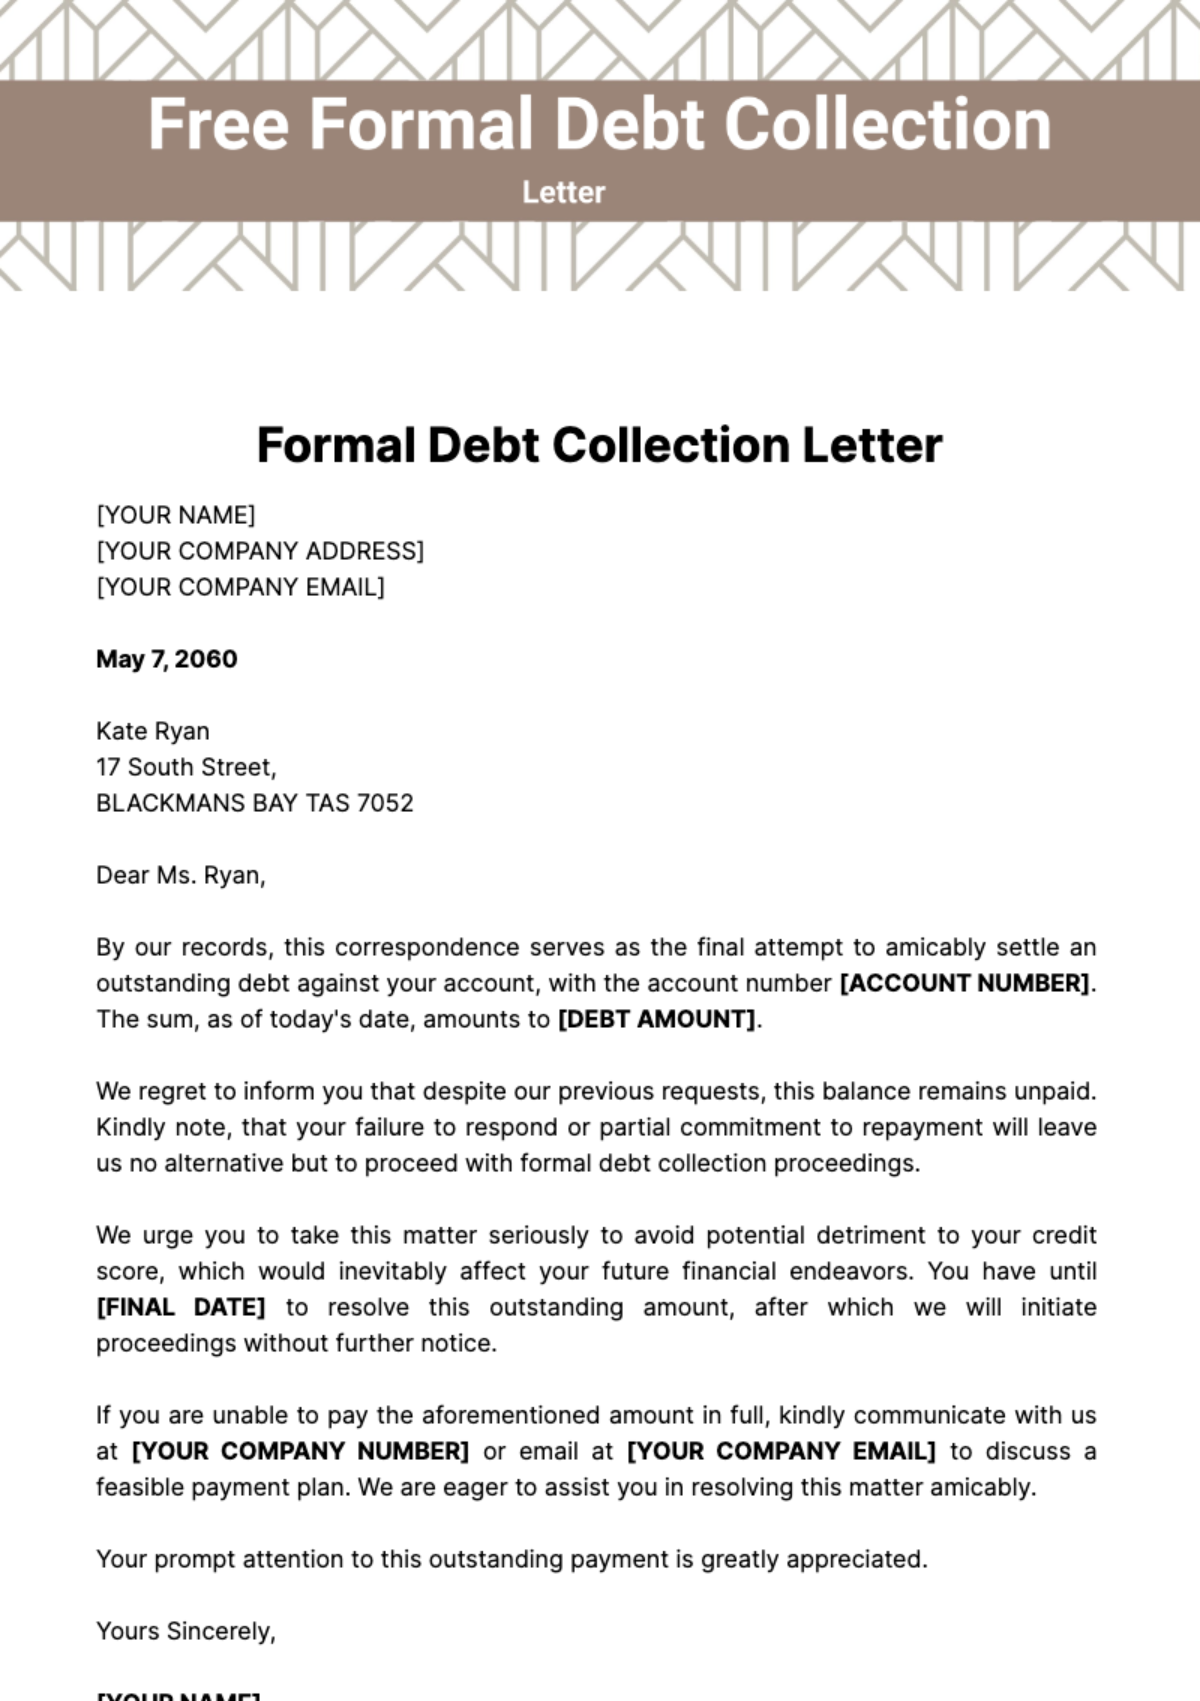 Free Formal Debt Collection Letter Template